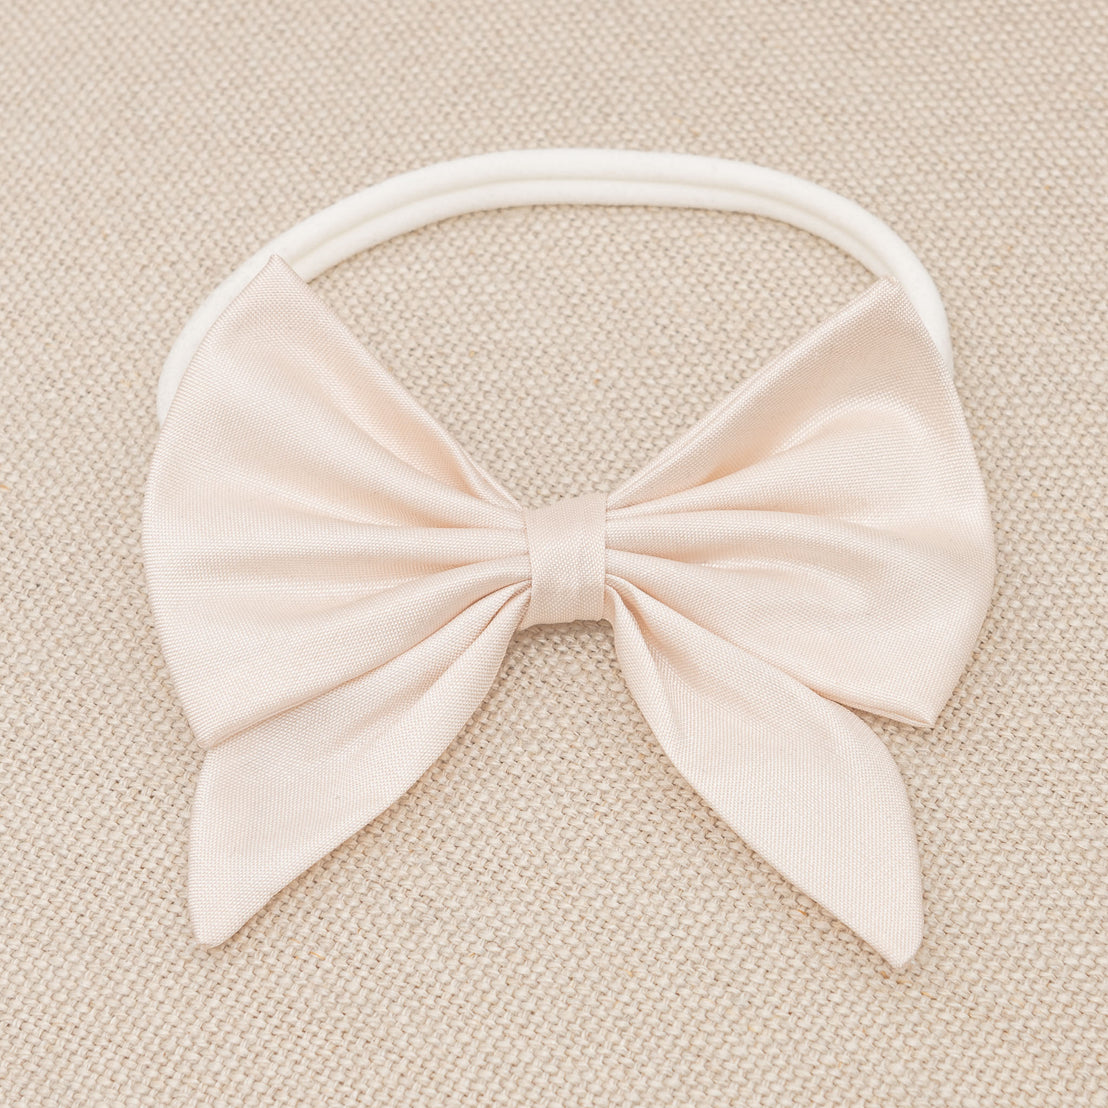 A Elizabeth Bow Headband displayed on a textured beige background, ideal for upscale or vintage baptism events. The bow is neatly tied and centrally positioned on the headband.